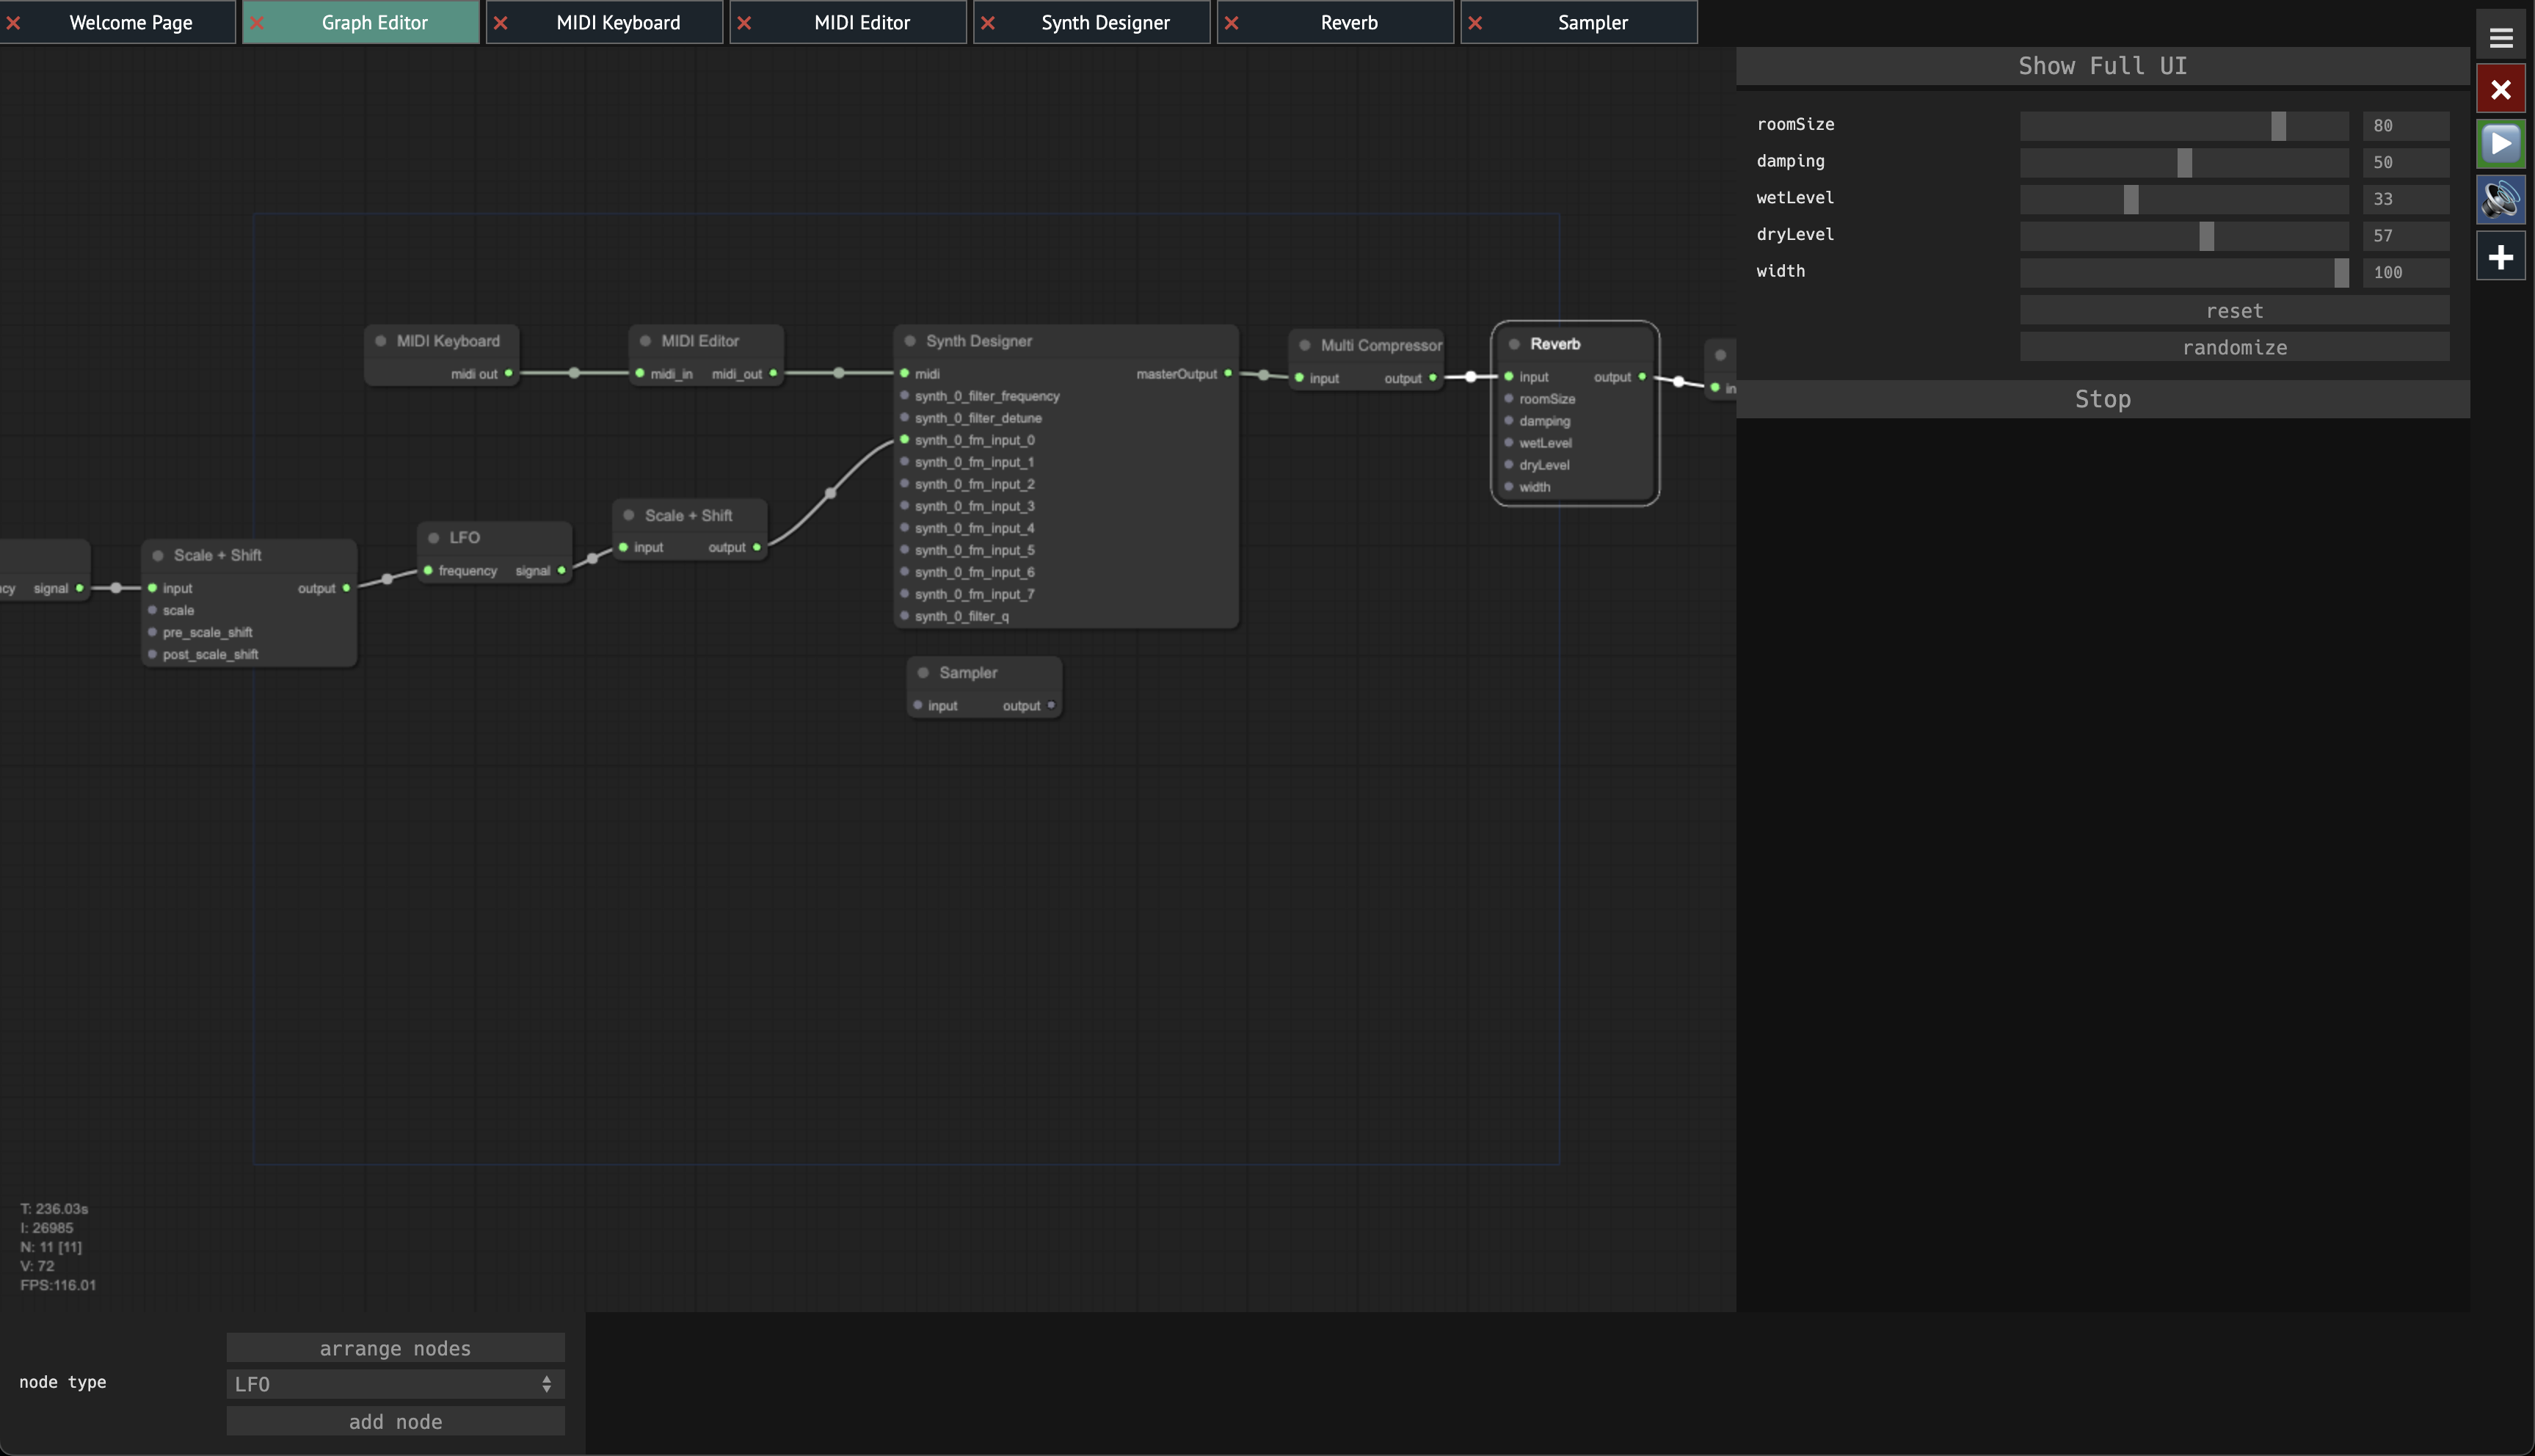 A screenshot of the graph editor showing several connected nodes along with a small UI for the currently selected node on the right